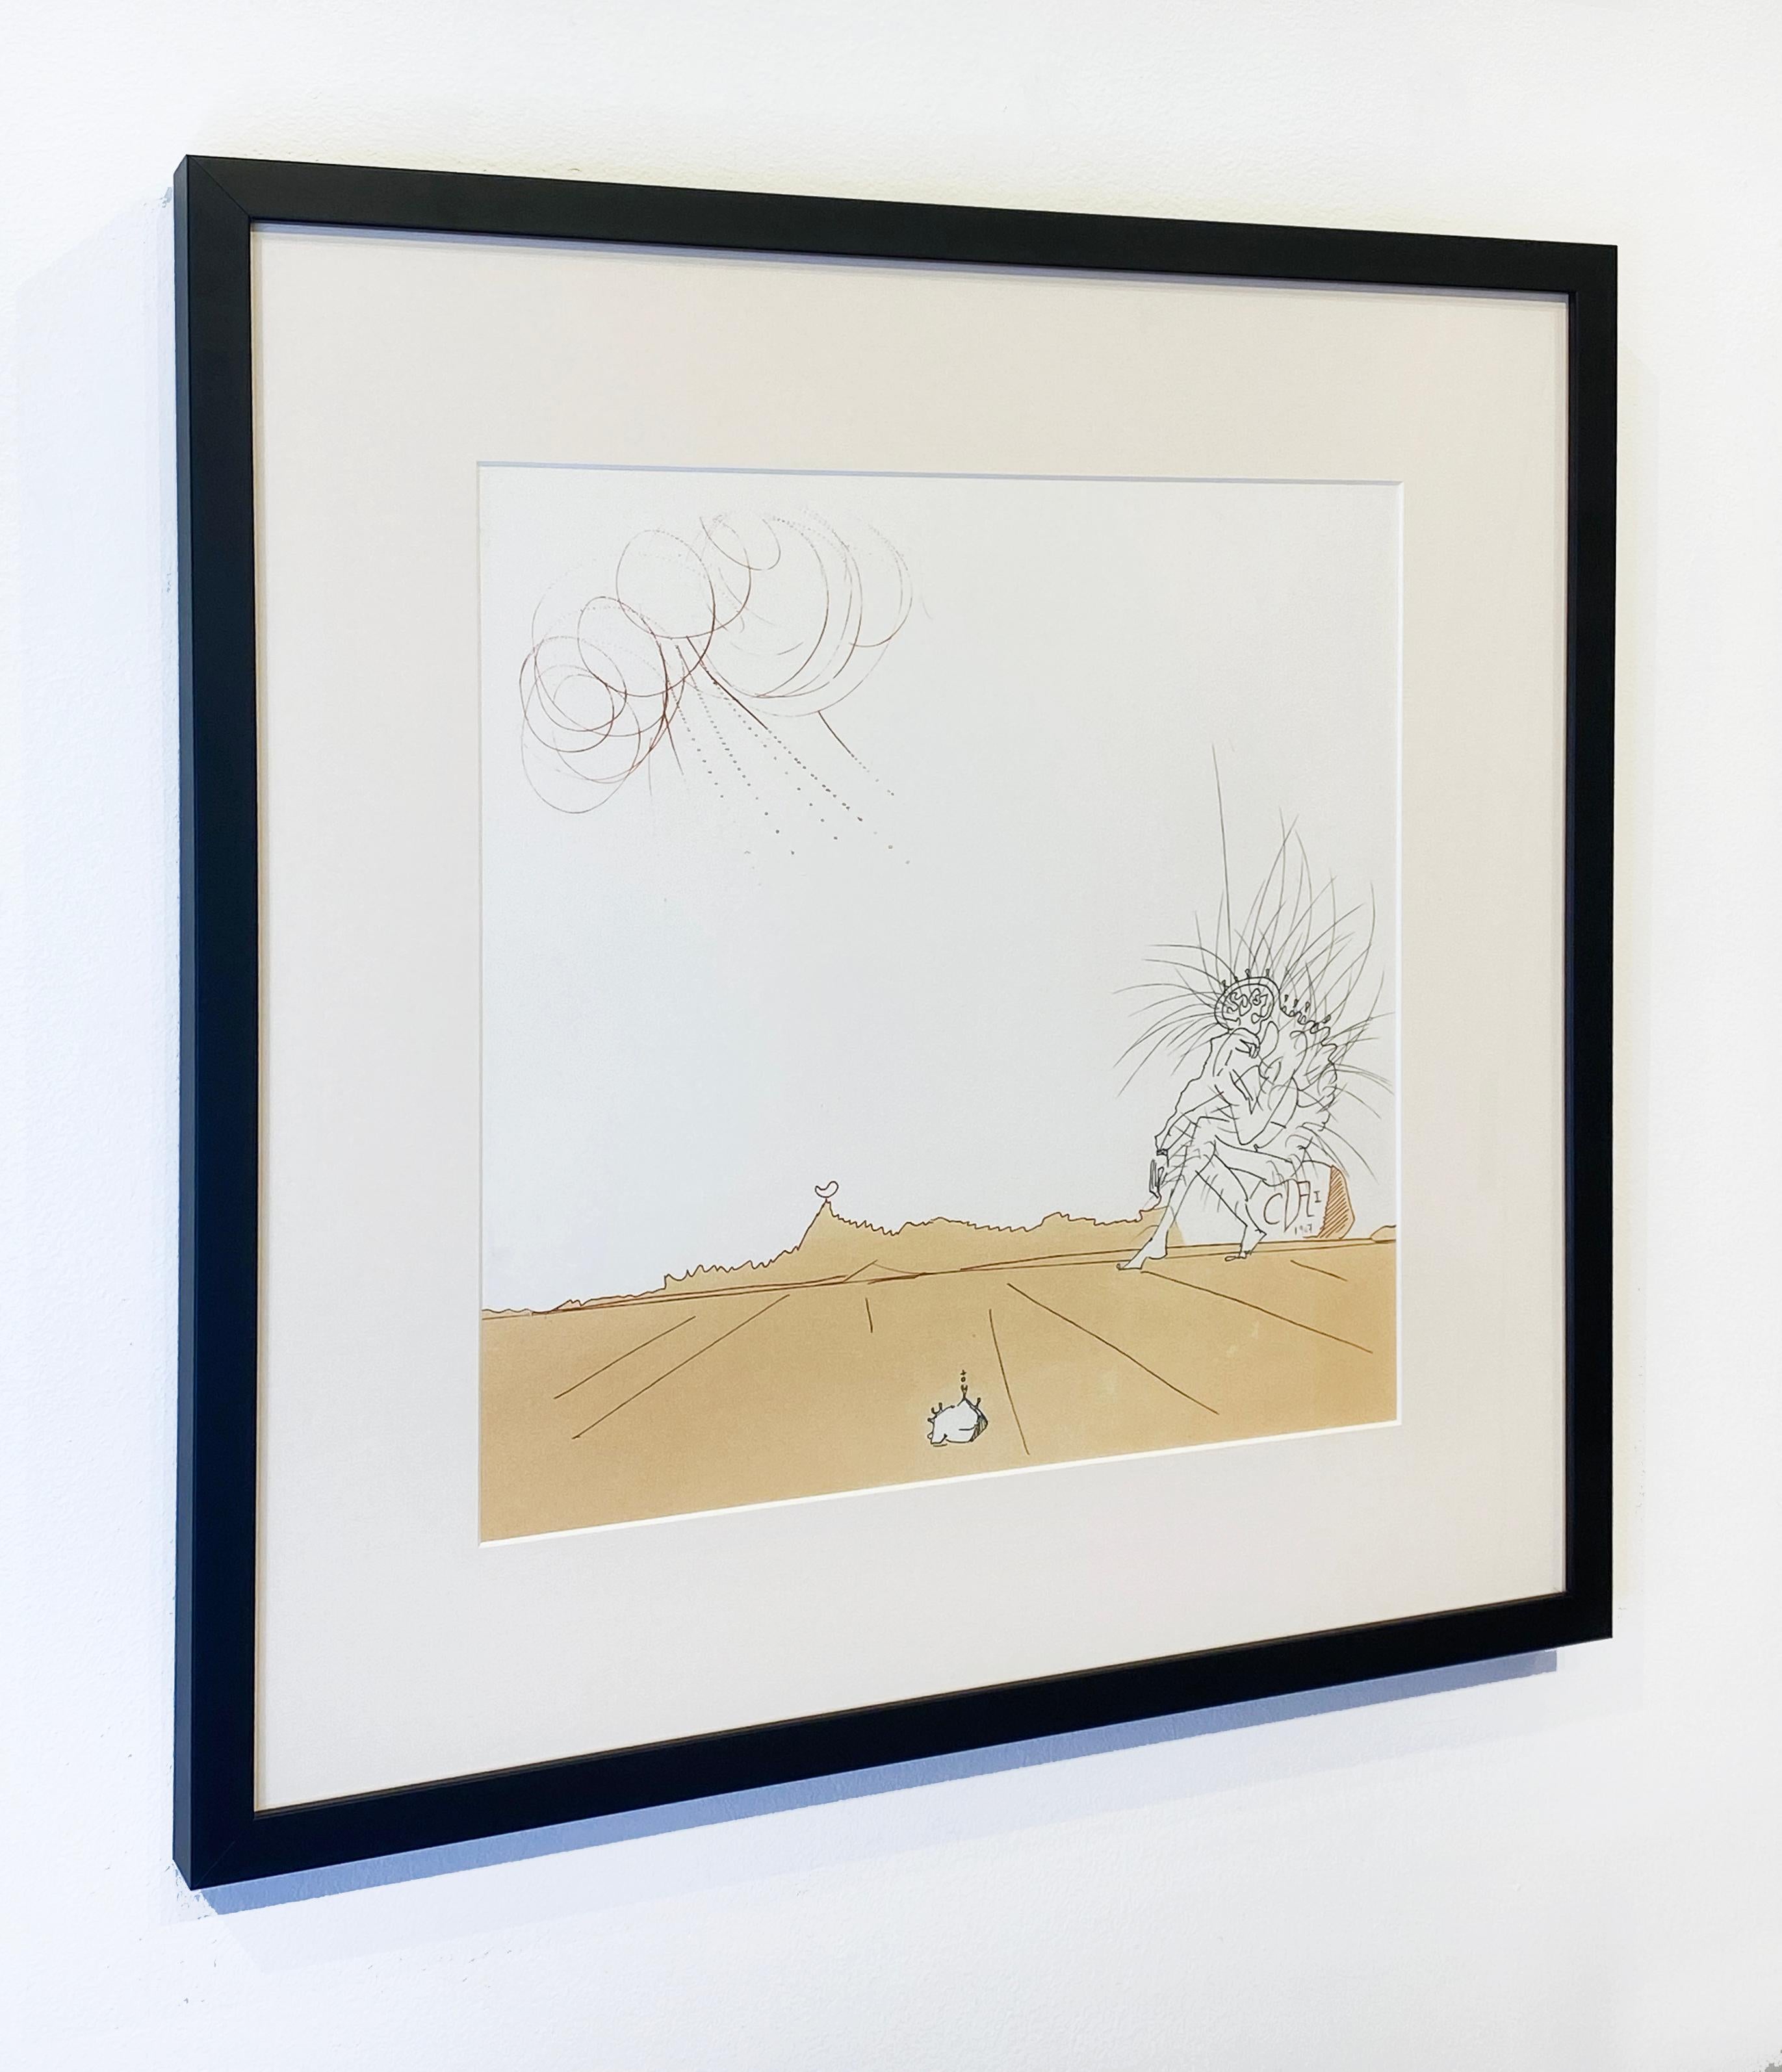 Artist:  Dali, Salvador
Title:  Meditation Orogenique from Pansy
Series:  Neuf Paysages
Date:  1980
Medium:  Aquatint and photogravures with black drypoint remarques
Framed Dimensions:  22.5